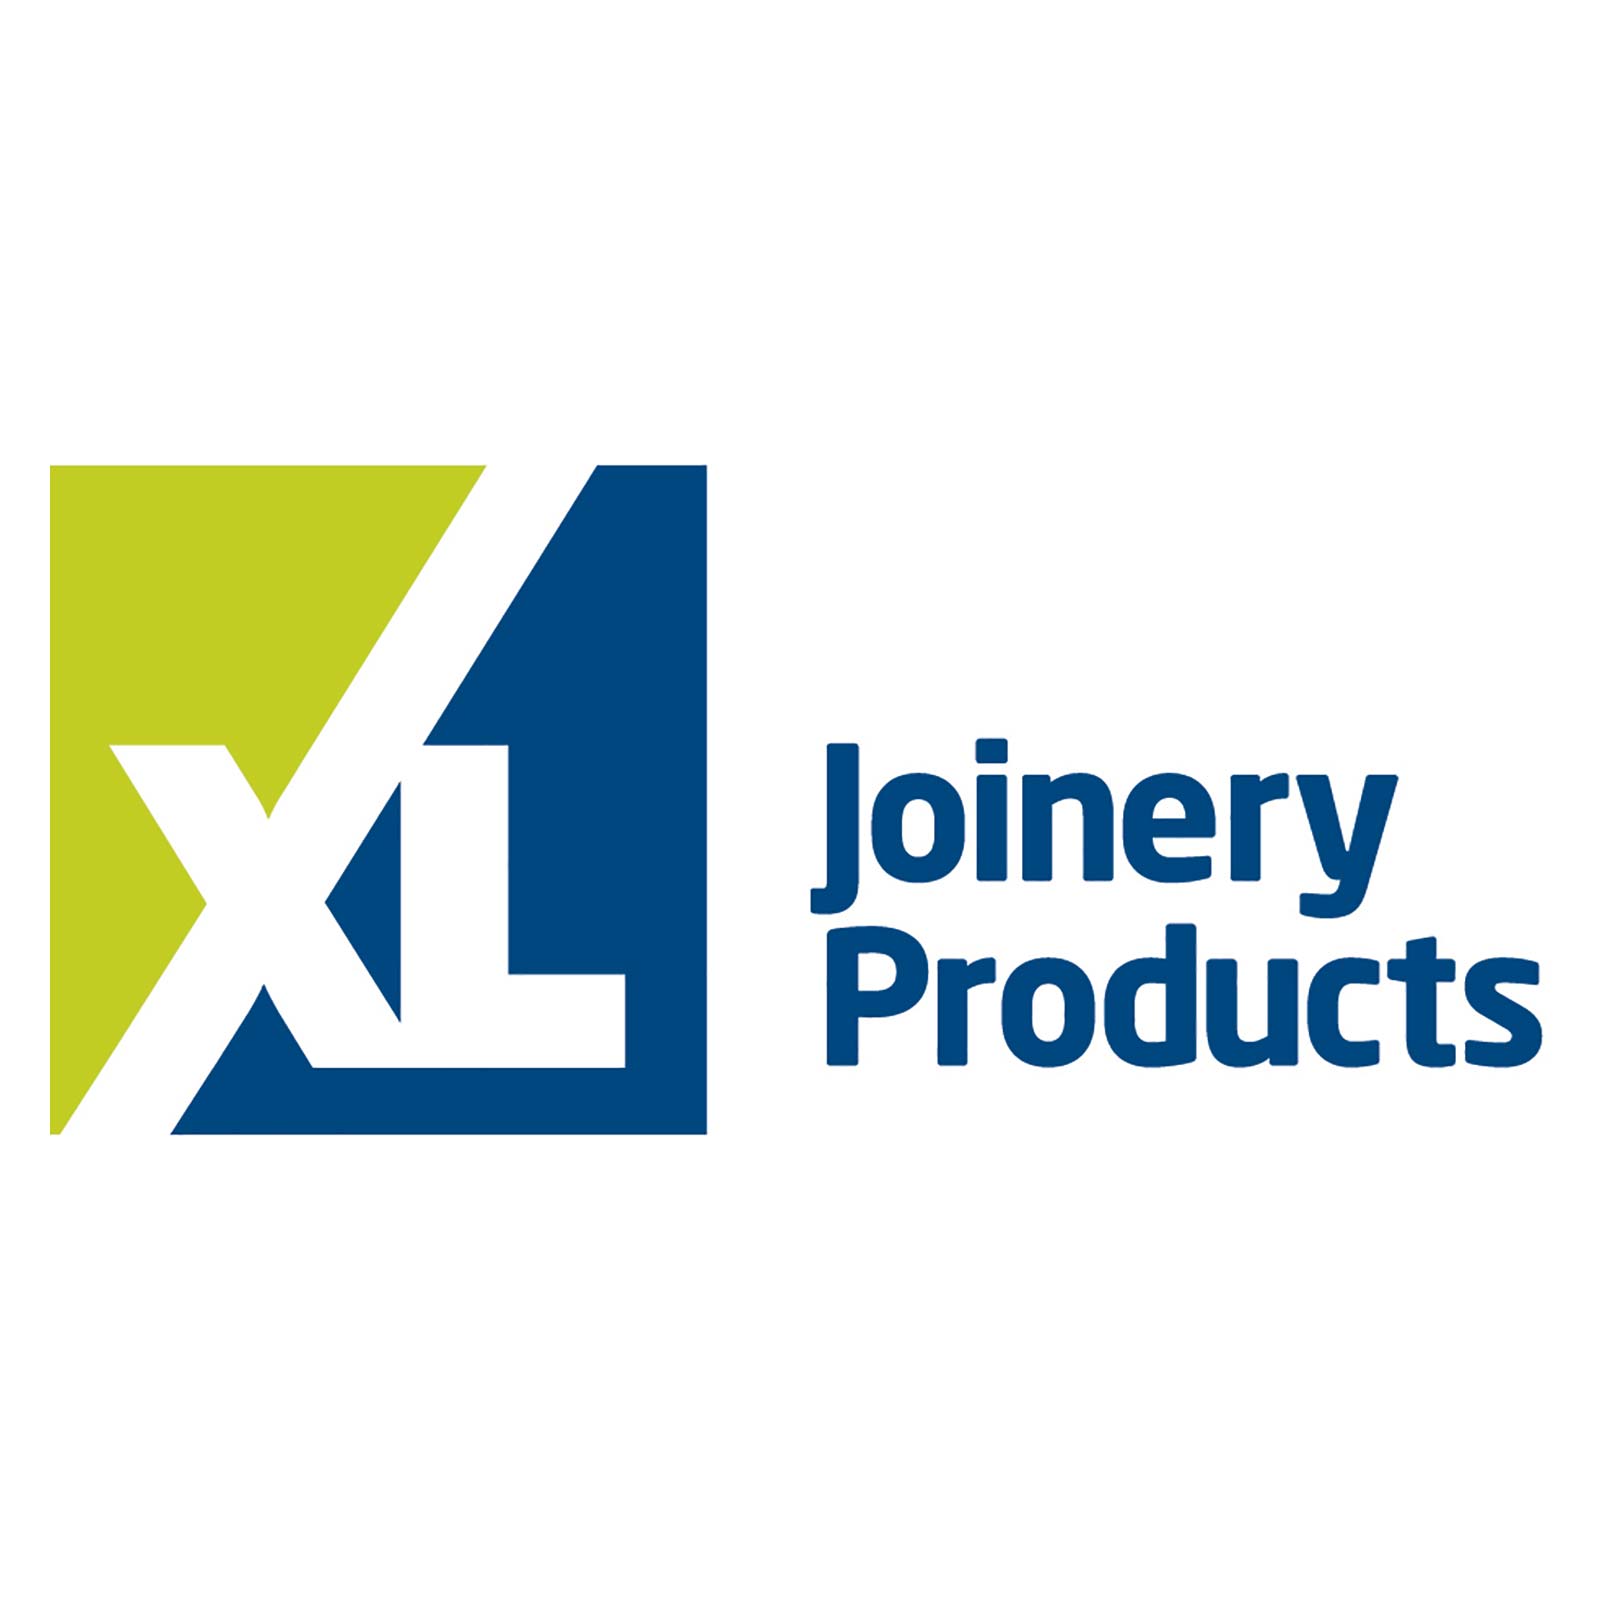 Xl Joinery